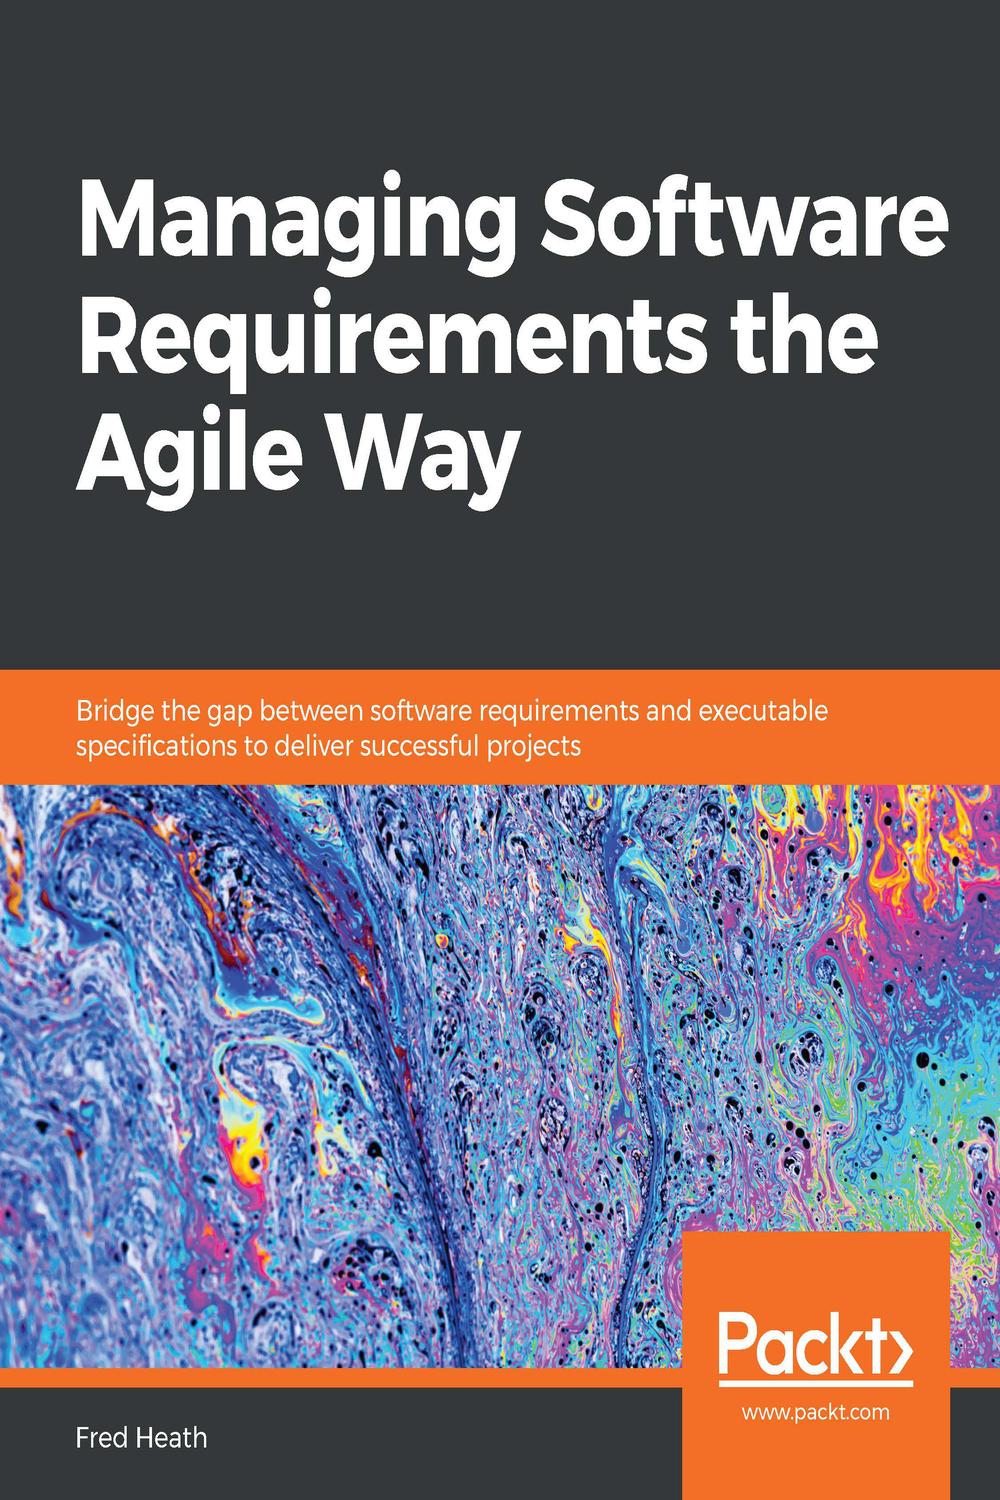 agile software requirements dean leffingwell pdf download